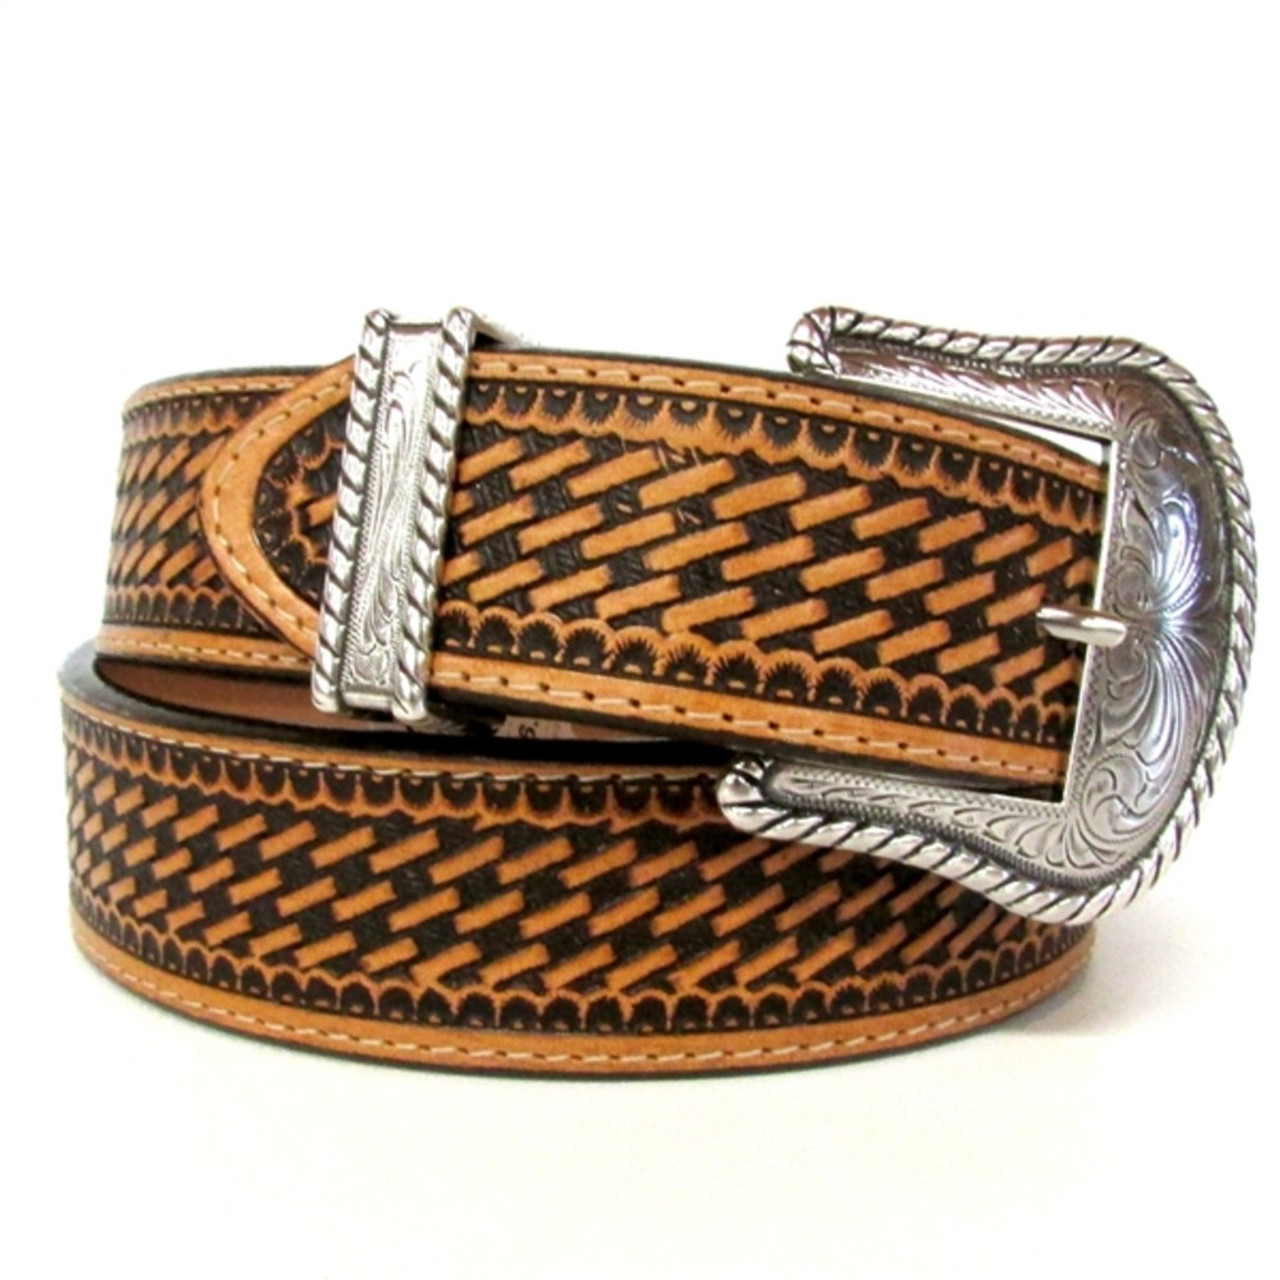 Cinch Ring Buckle – Panhandle Leather Co.